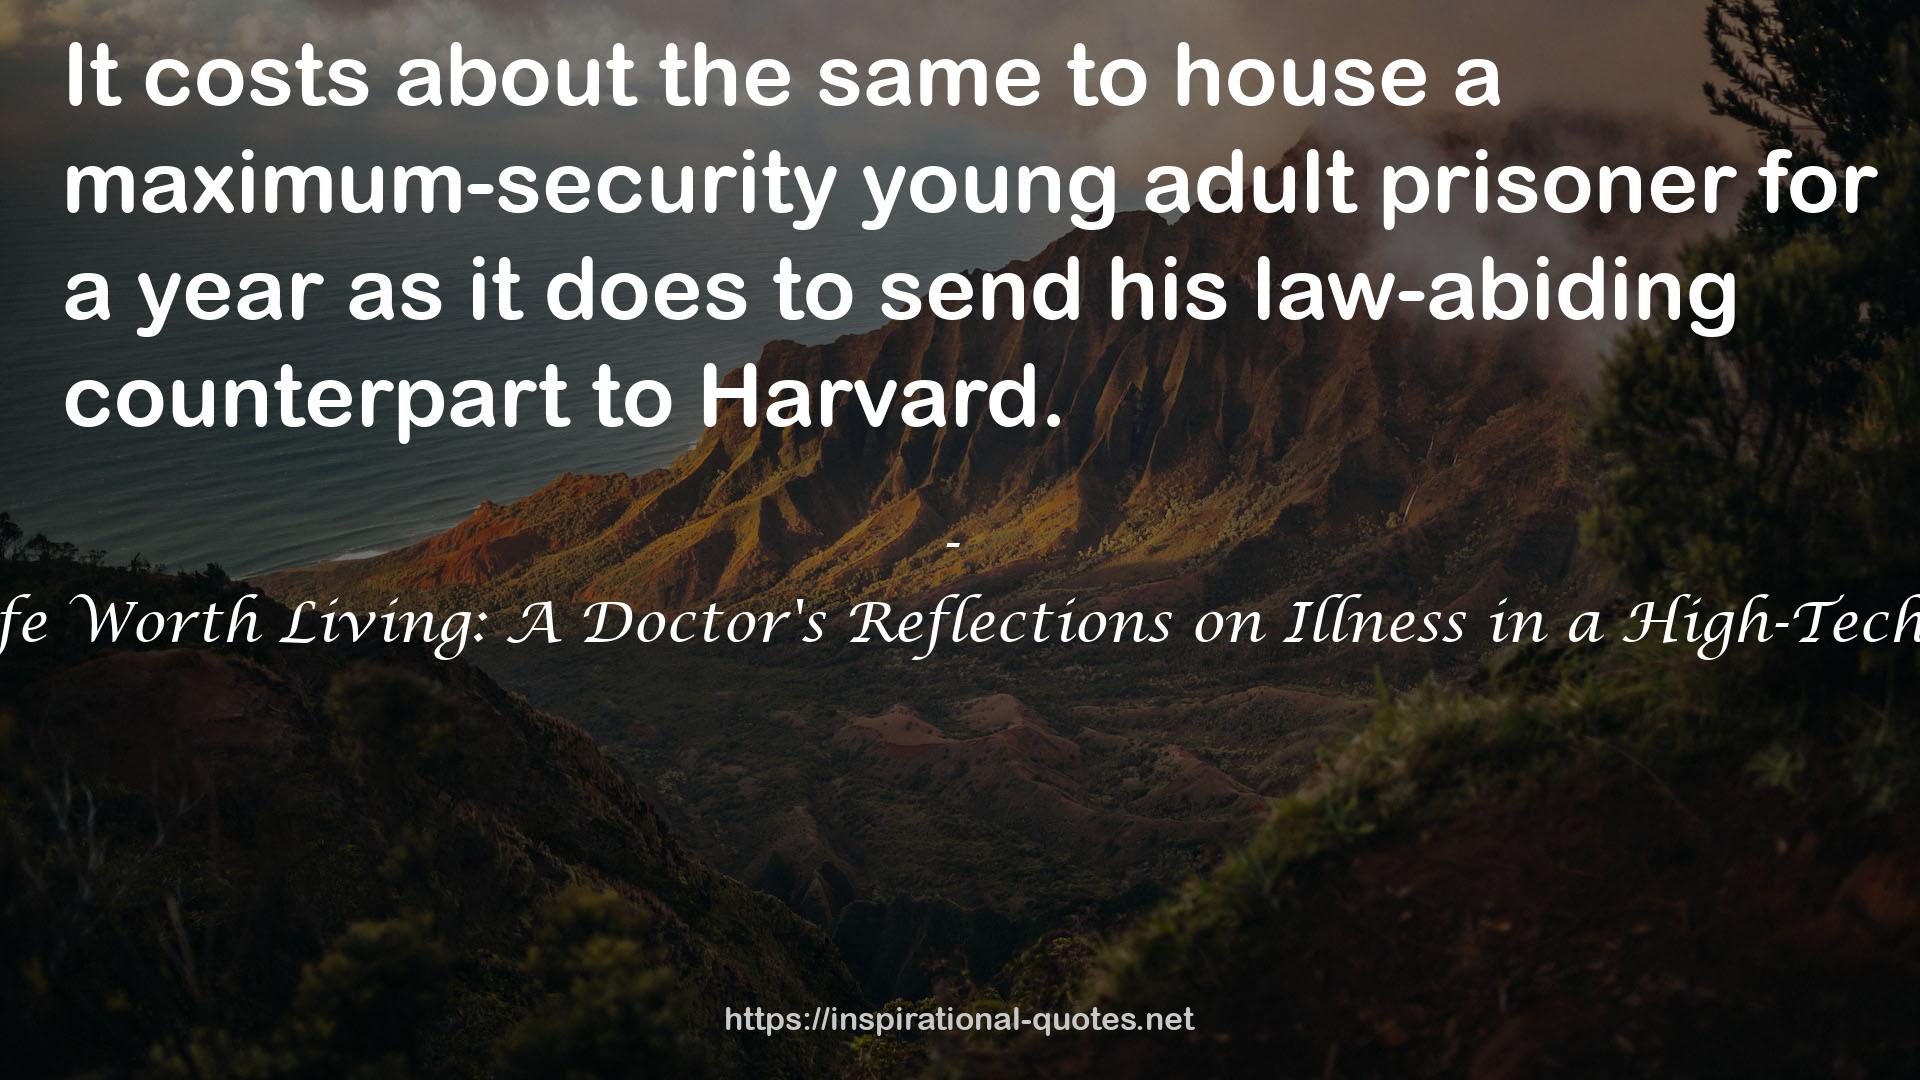 A Life Worth Living: A Doctor's Reflections on Illness in a High-Tech Era QUOTES